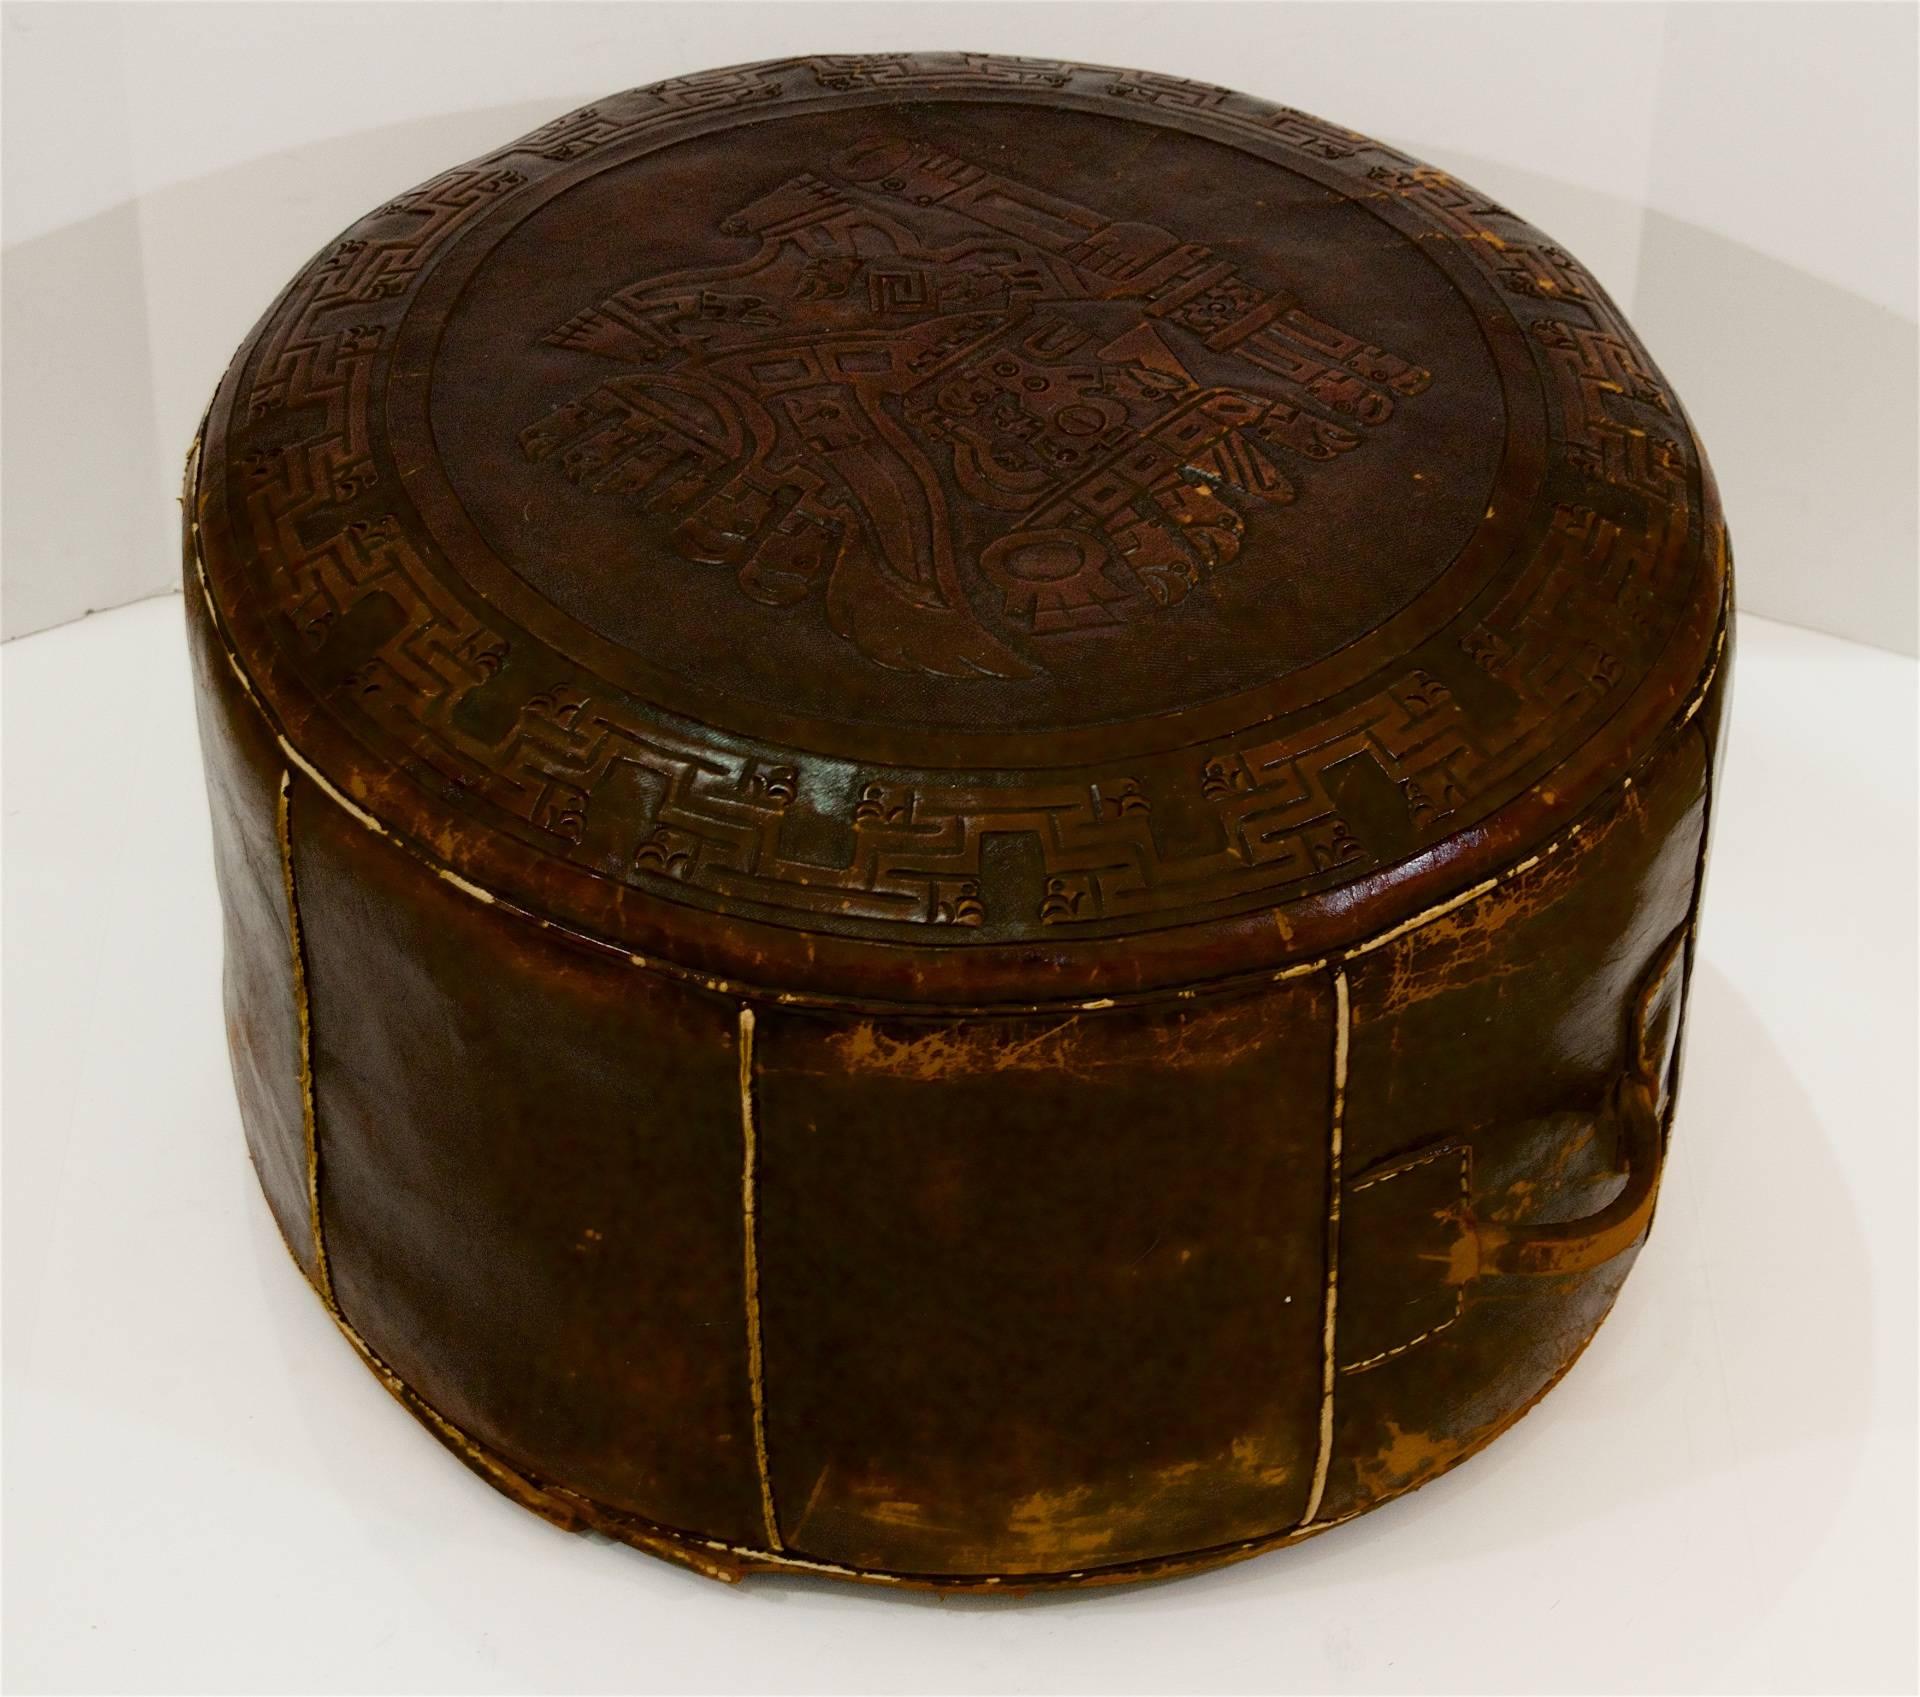 A brown leather pouf with embossed Aztec or Incan motifs. Perfect occasional seating or as an ottoman.